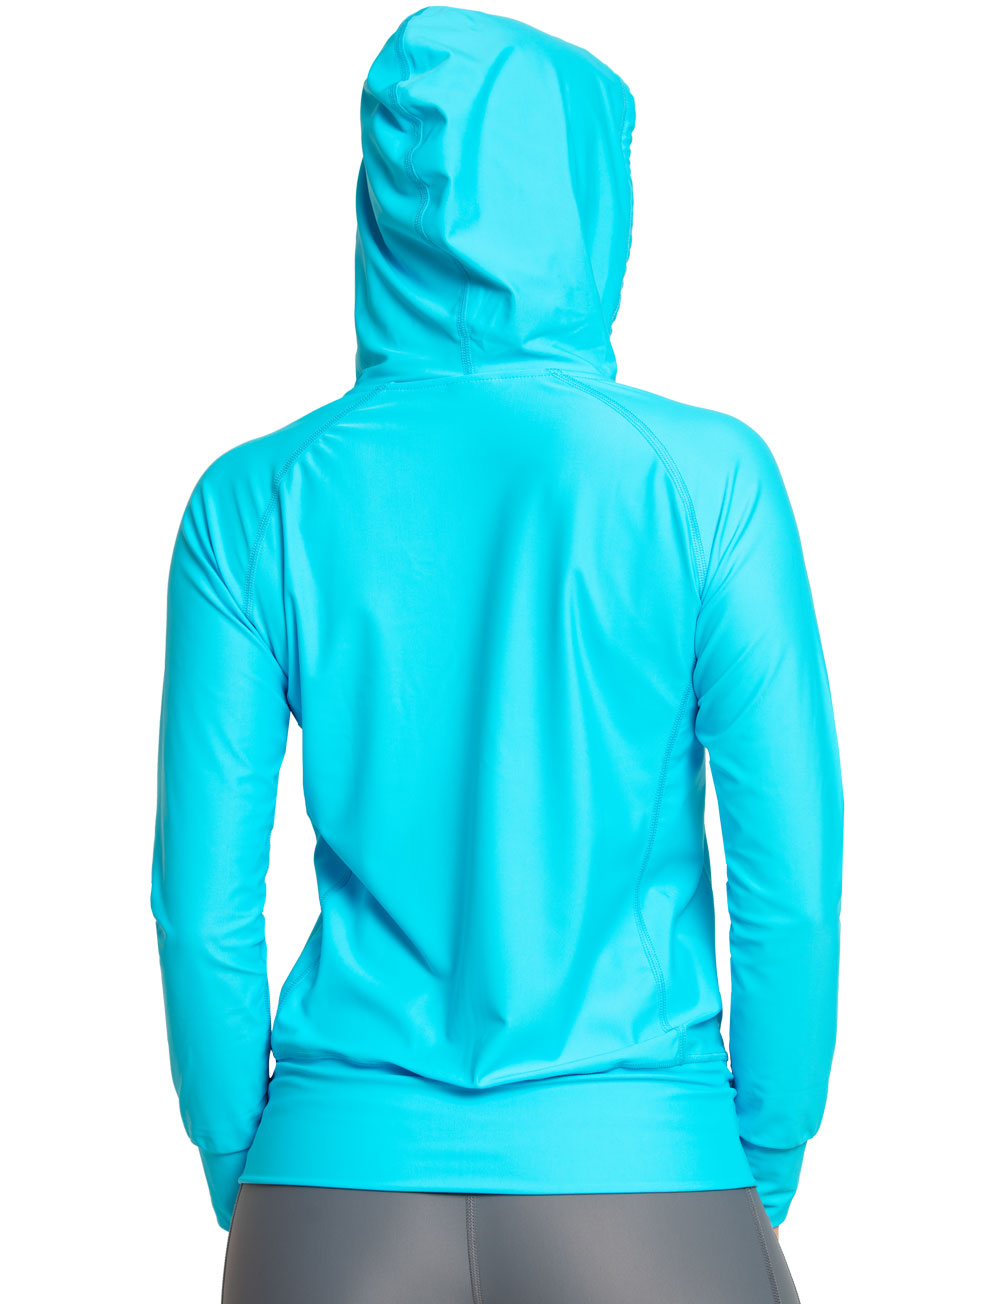 Lightweight Leisure Hooded Jacket for Women with Sun Protection